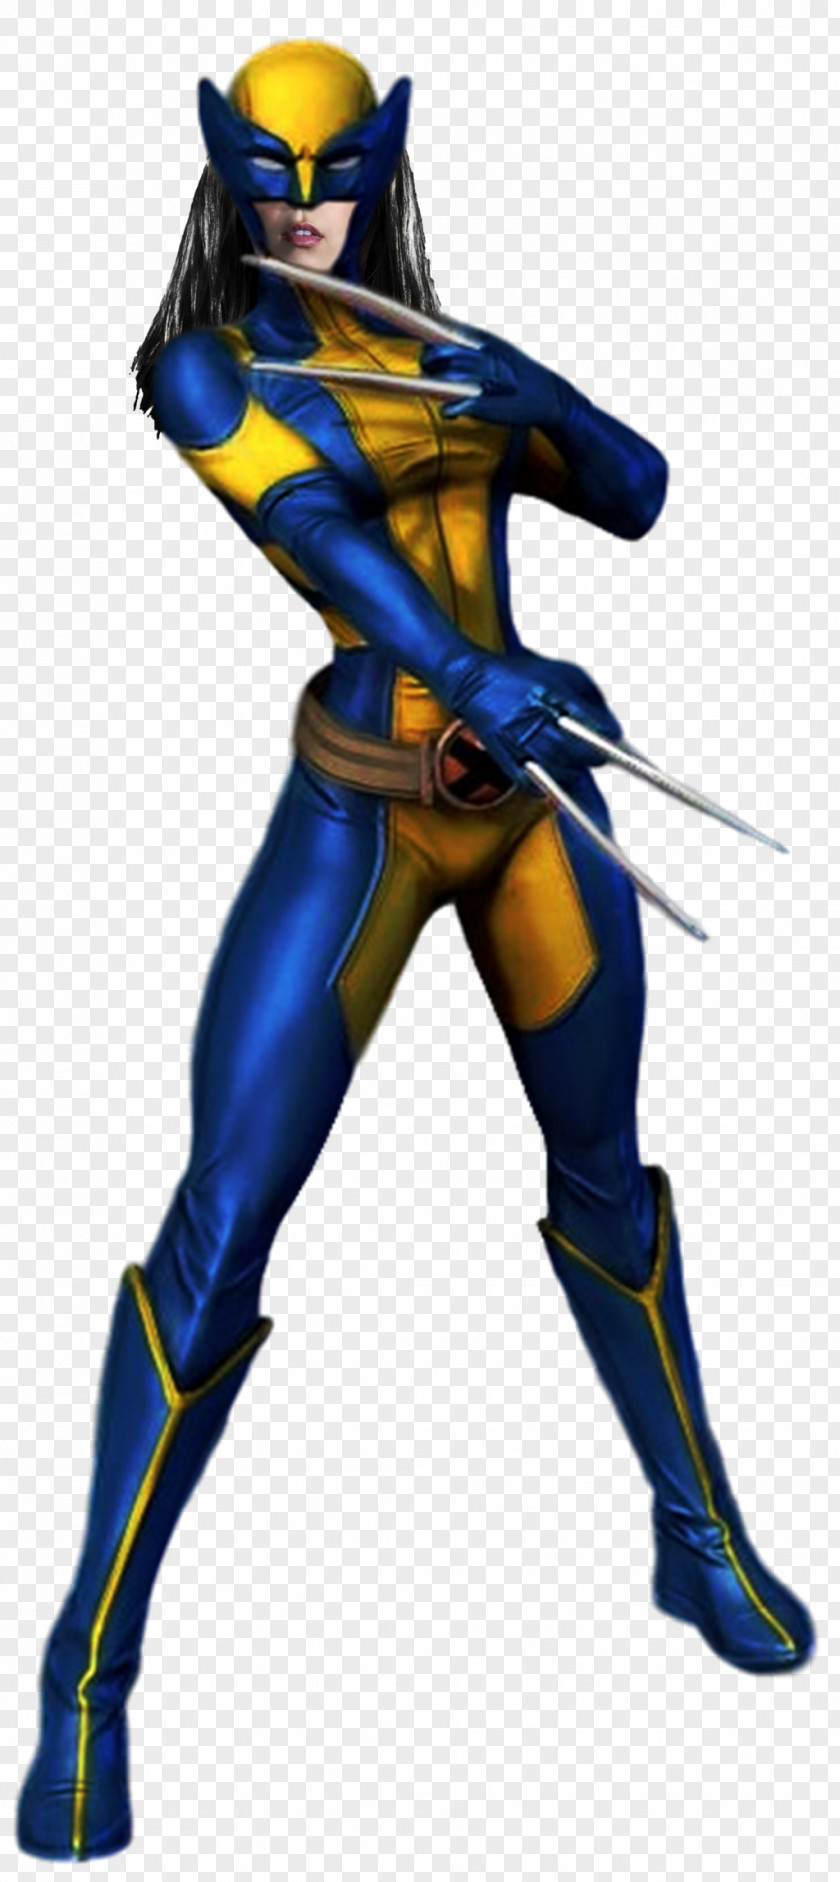 Various Comics Marvel: Contest Of Champions Marvel Heroes 2016 X-23 Wolverine PNG